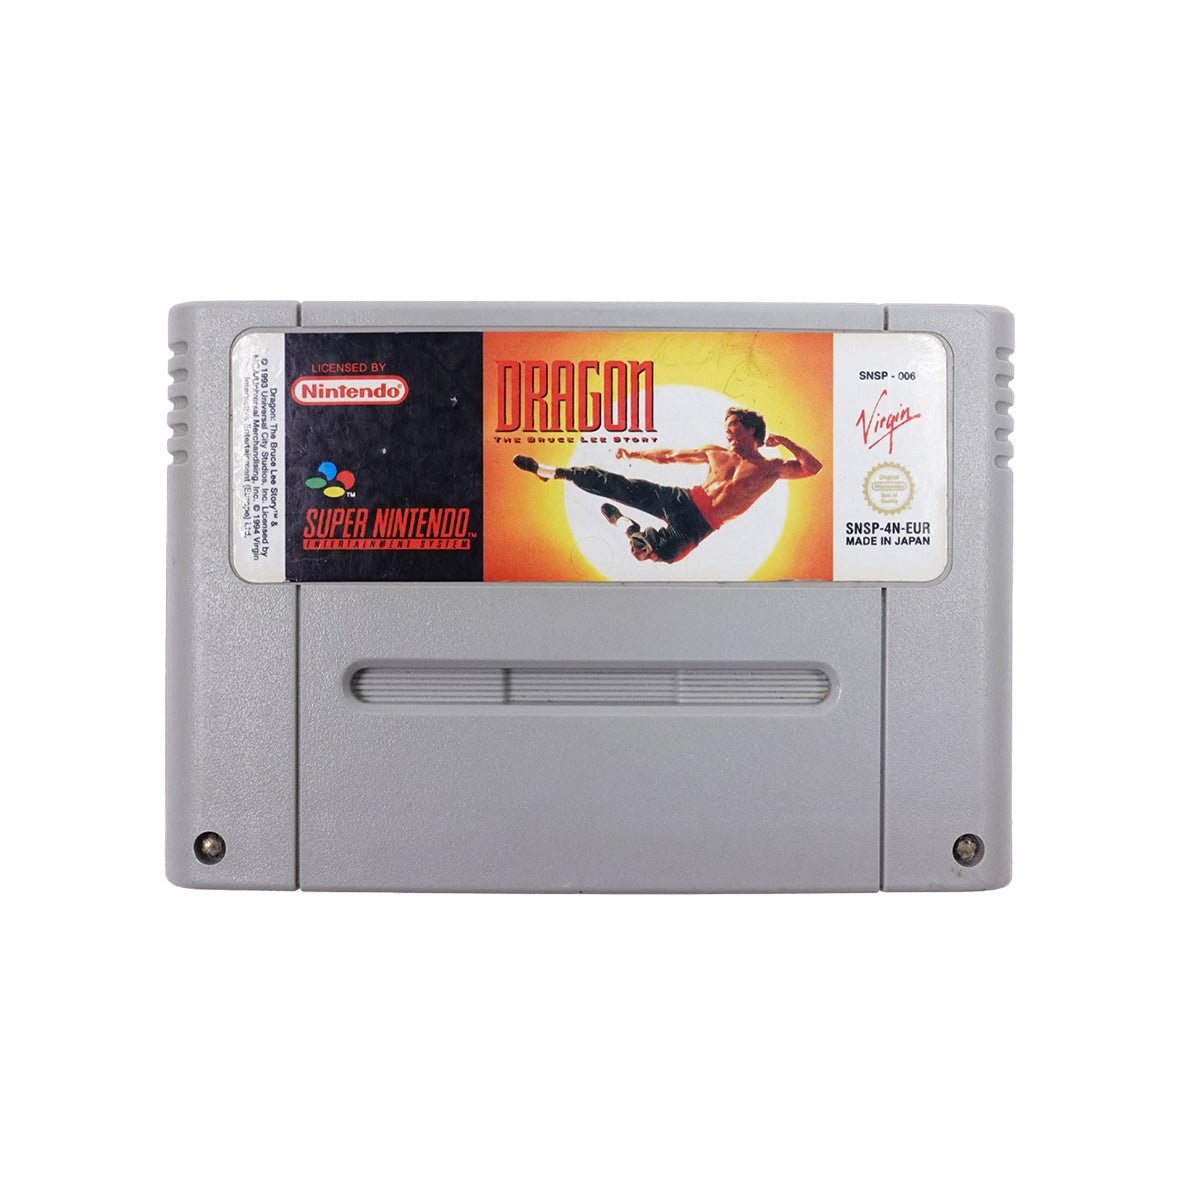 (Pre-Owned) Dragon: The Bruce Lee Story - Super Nintendo Entertainment System - Store 974 | ستور ٩٧٤